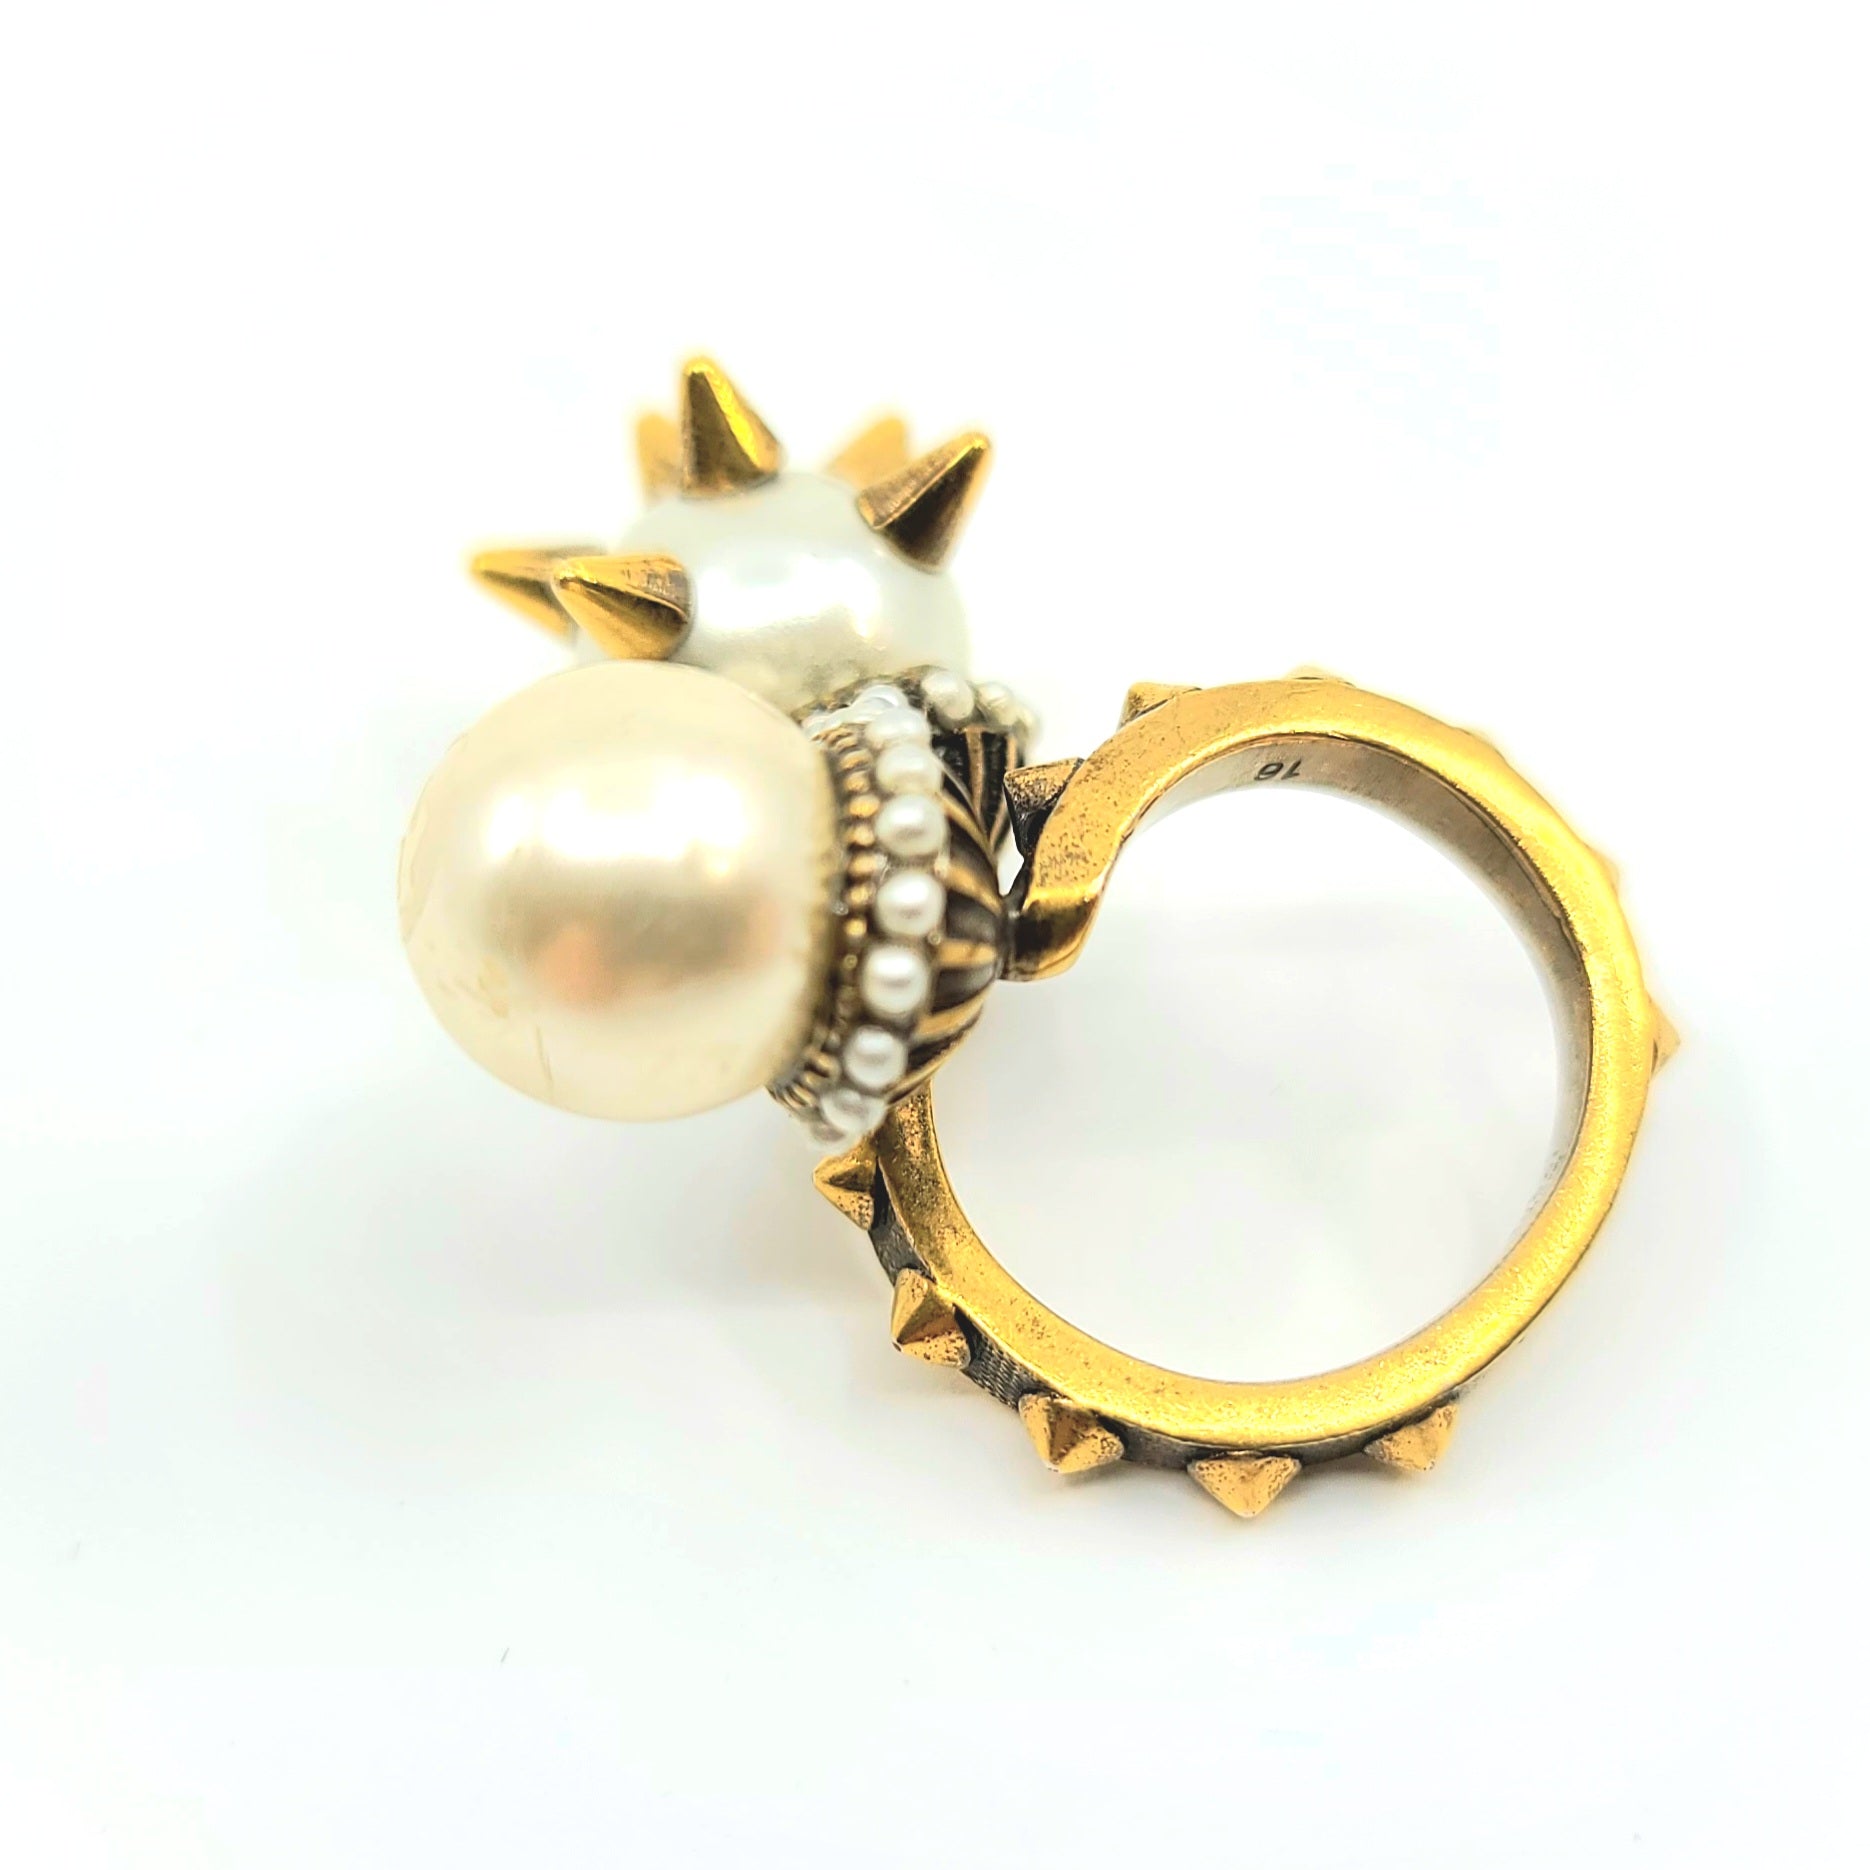 NEW GUCCI RING WITH DOUBLE GLASS PEARLS & SPIKES